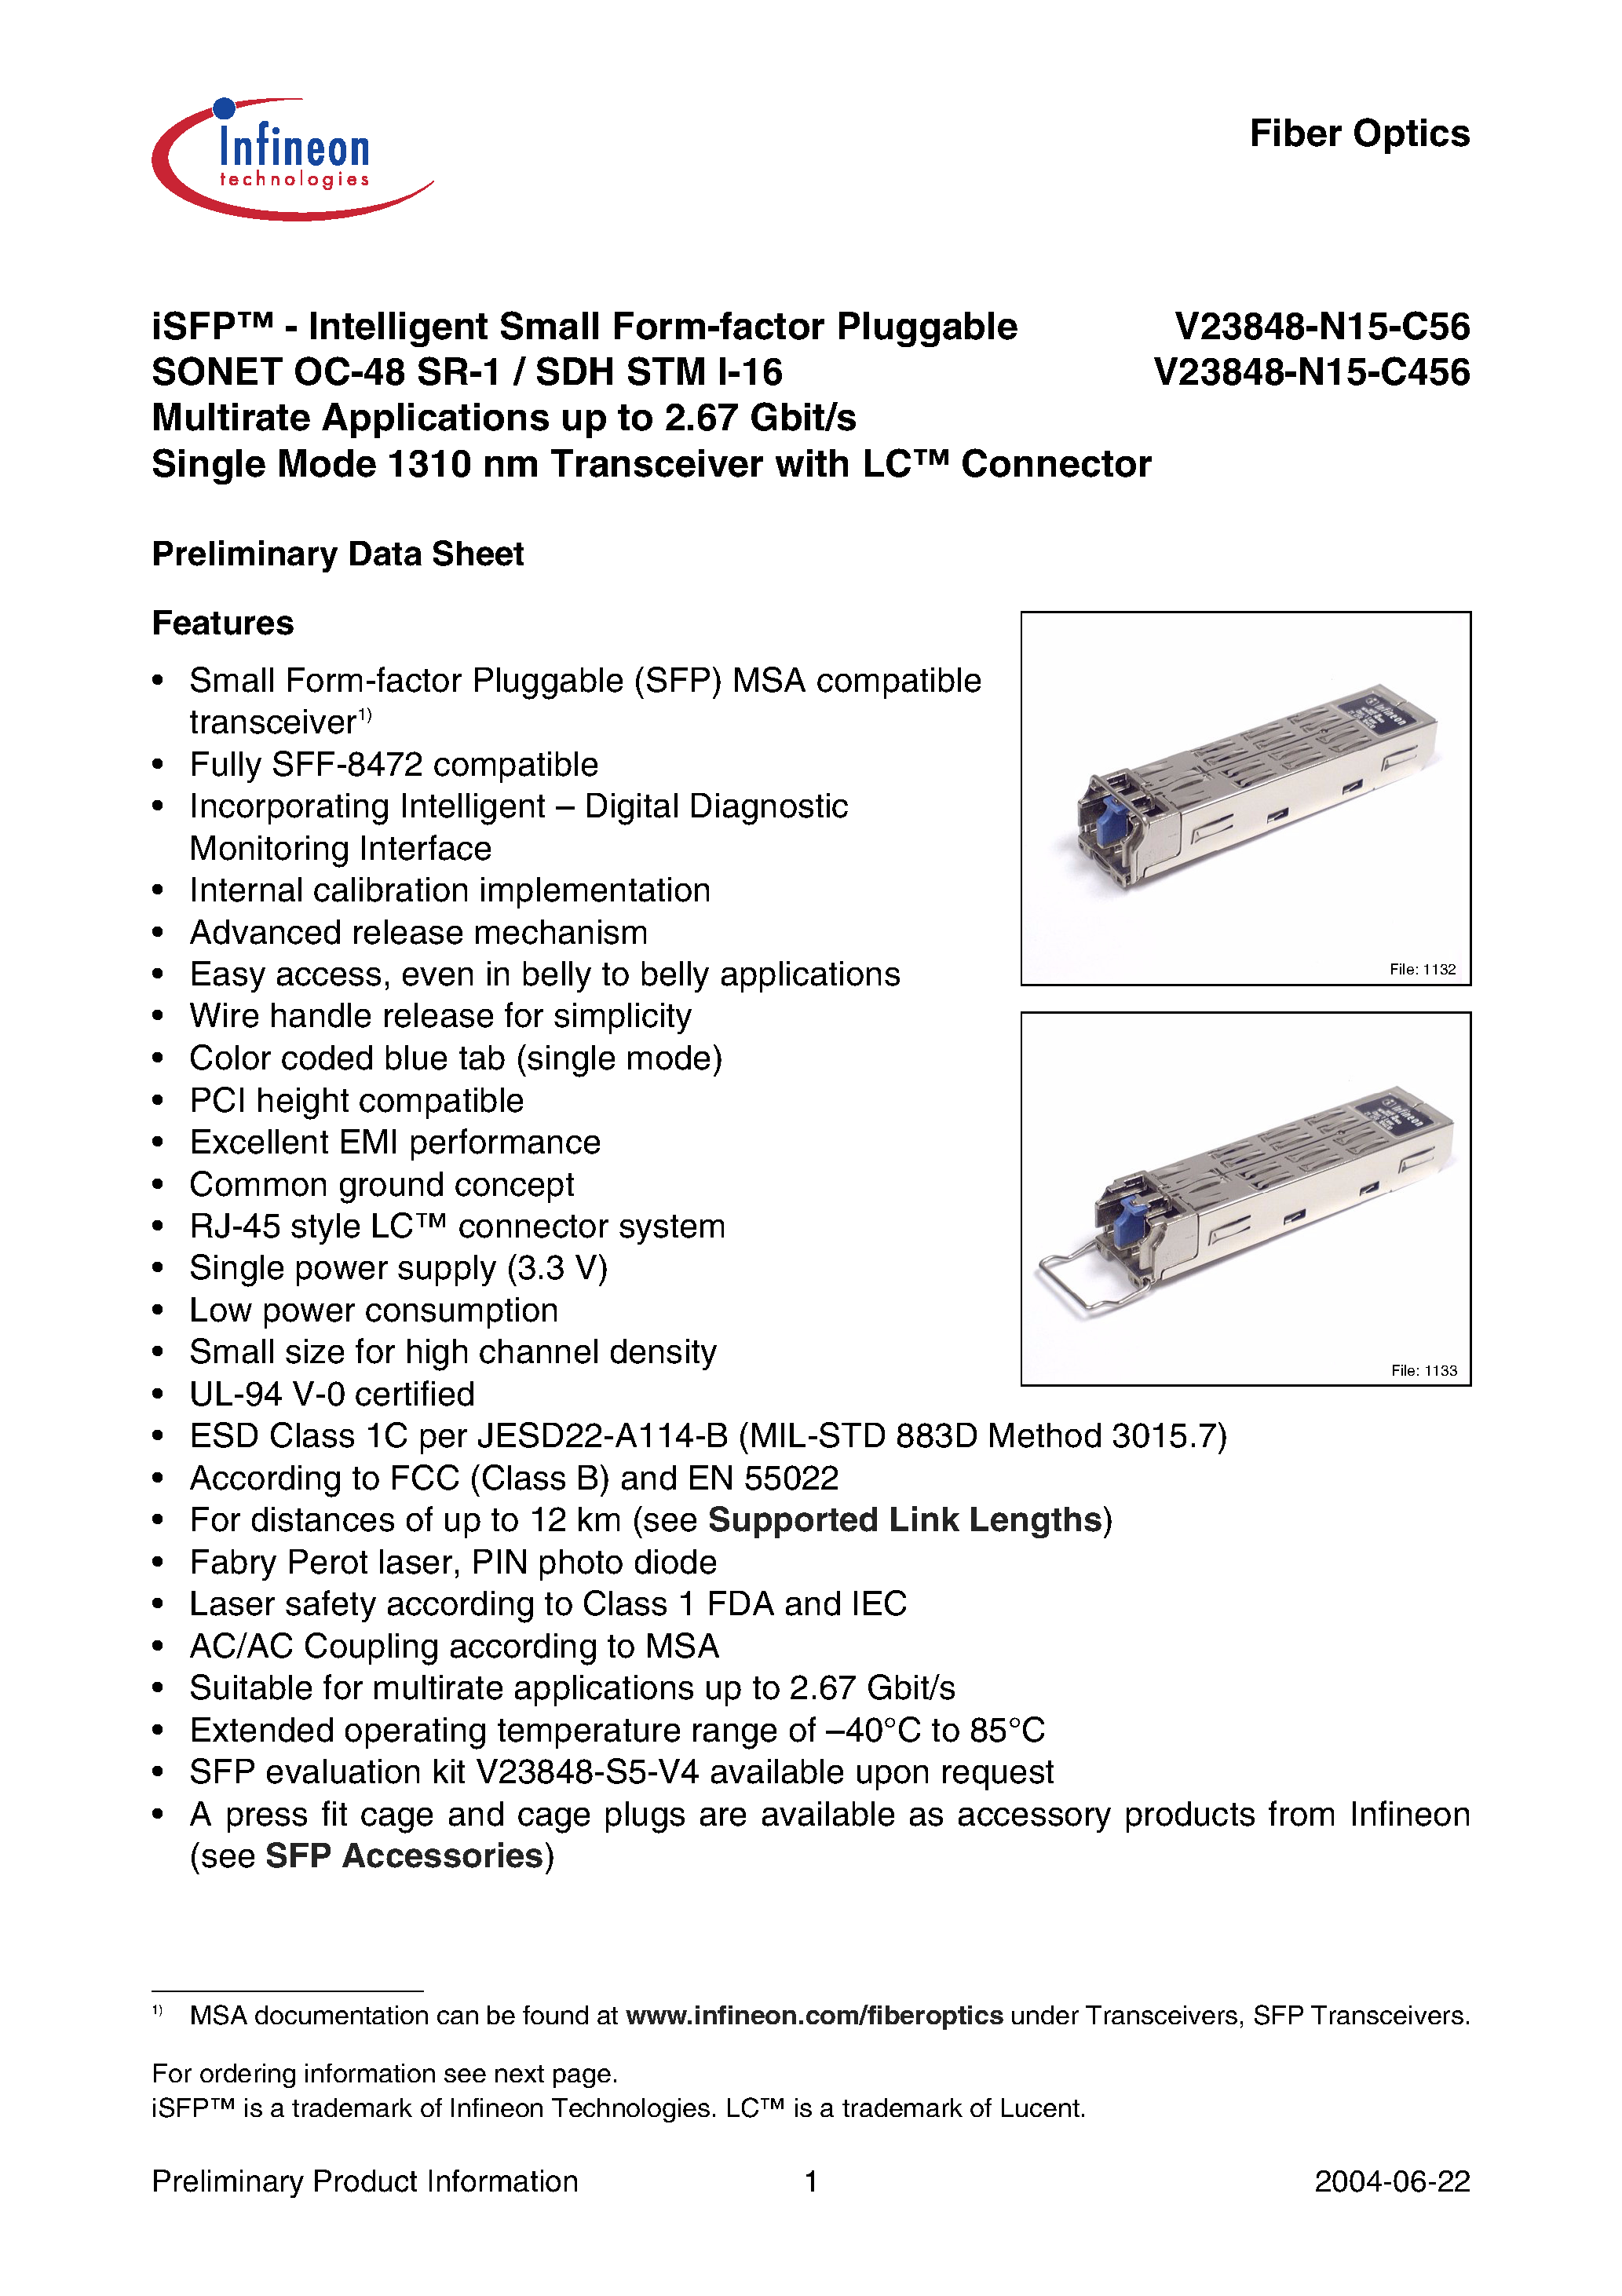 Datasheet V23848-N15-C56 - iSFP-Intelligent Small Form-factor Pluggable SONET OC-48 SR-1 / SDH STM I-16 Multirate Applications up to 2.67 Gbit/s page 1